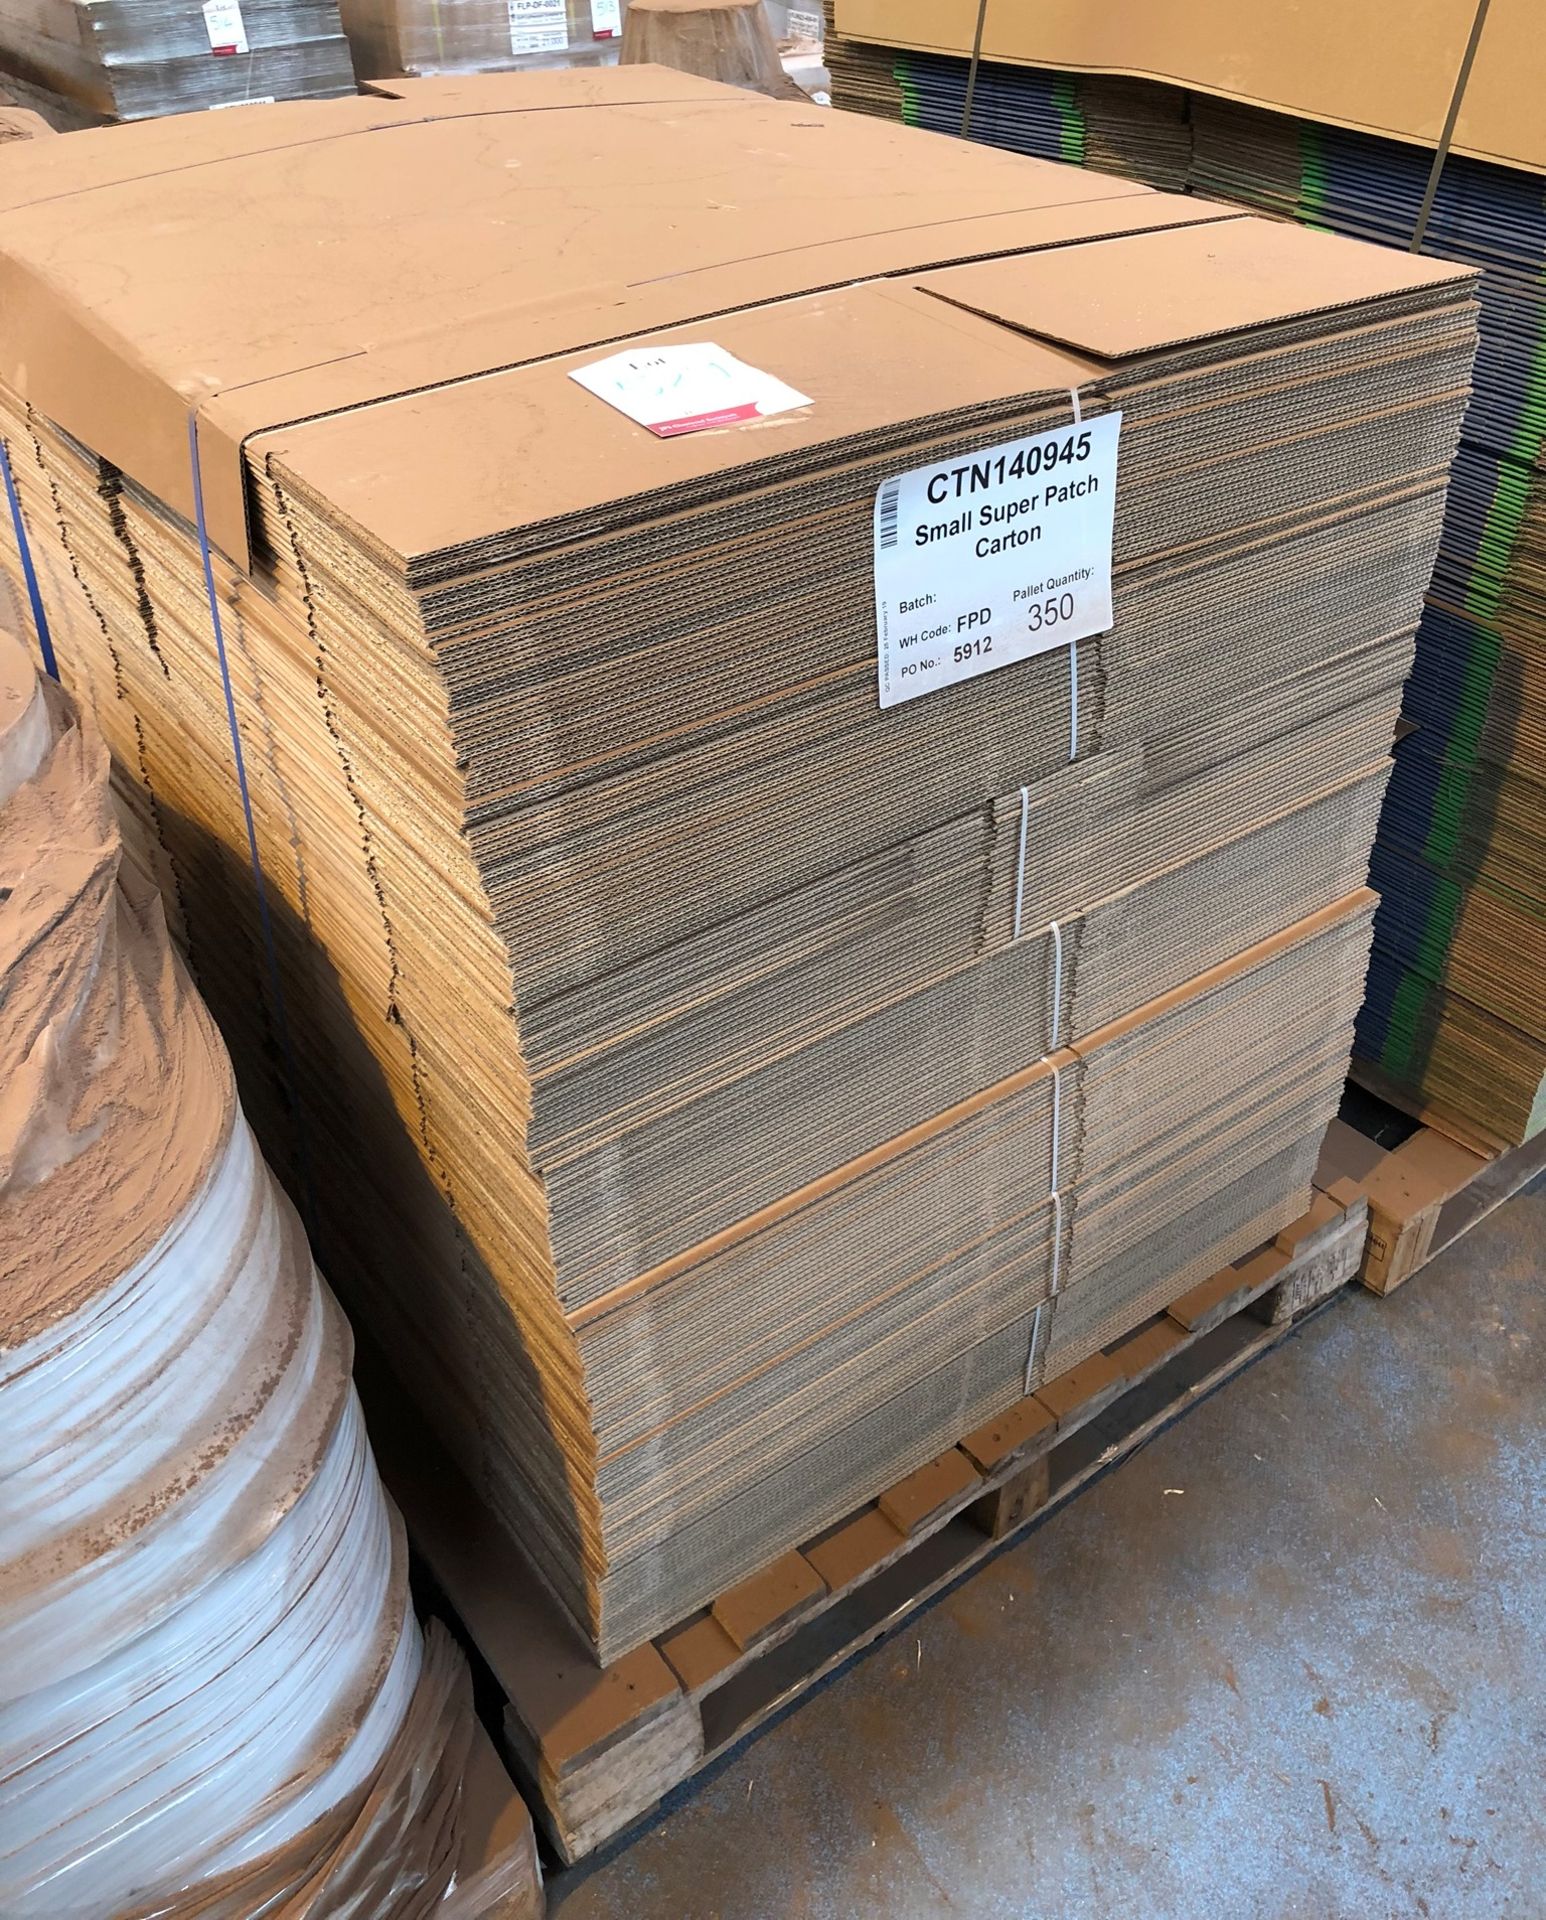 Approximately 350 x Small Super Patch Cartons